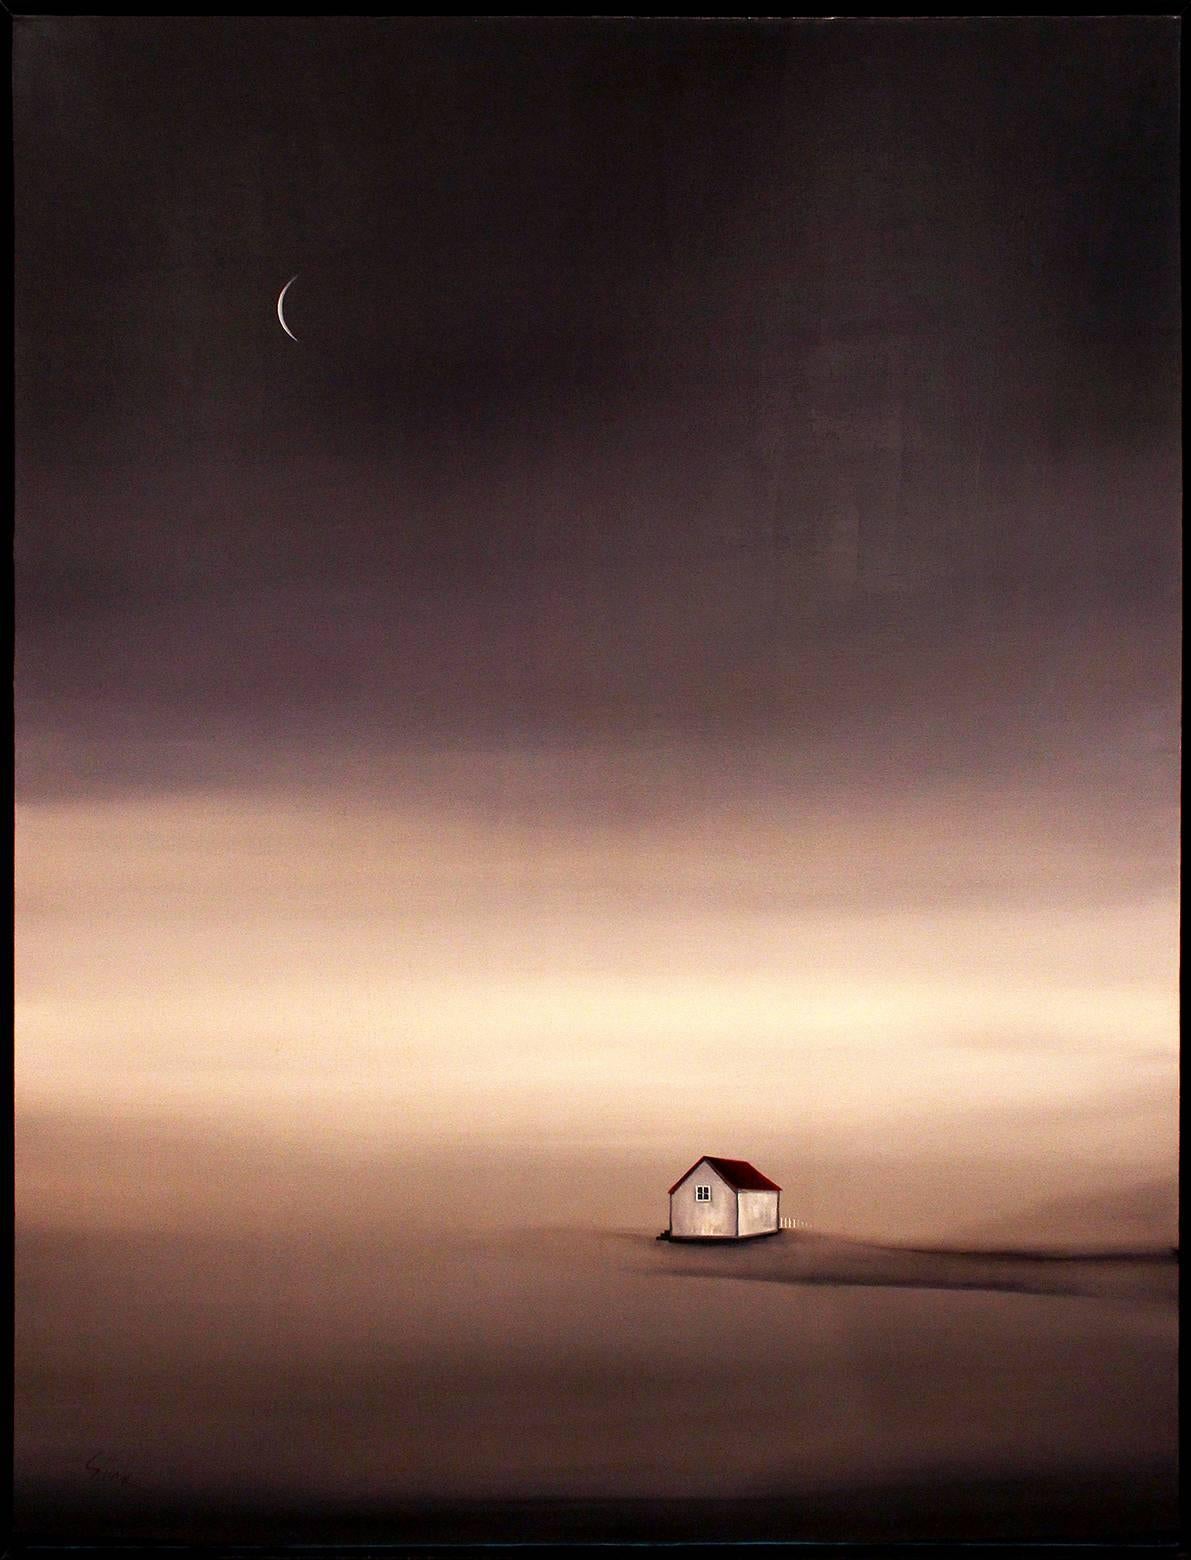 Crescent Moon House in the End - Painting by Marketa Sivek